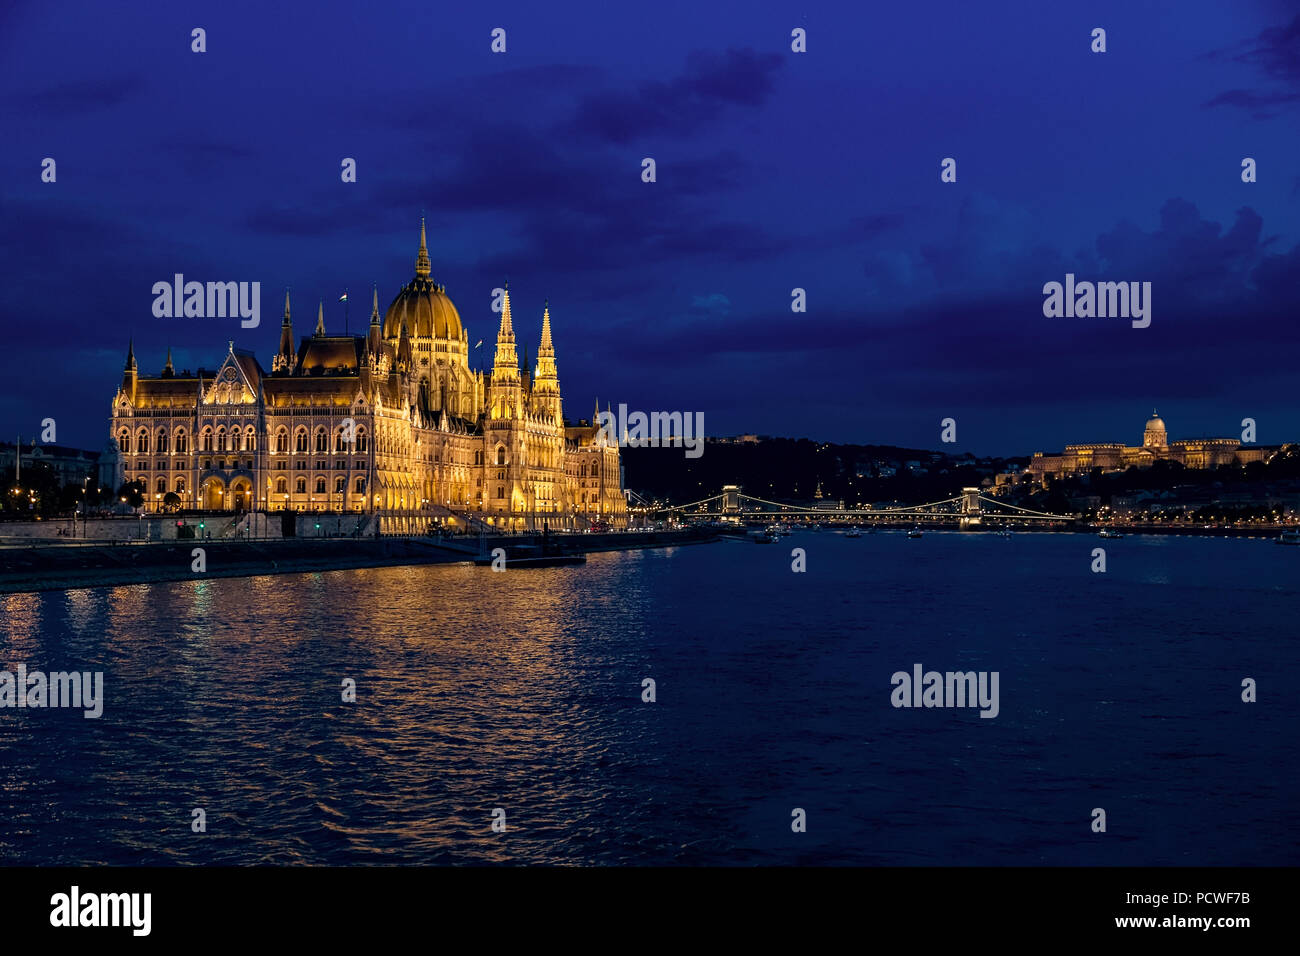 Night view of Budapest city. Parliament building on left, Buda Castle Hill on right and the Chain Bridge in middle. Stock Photo